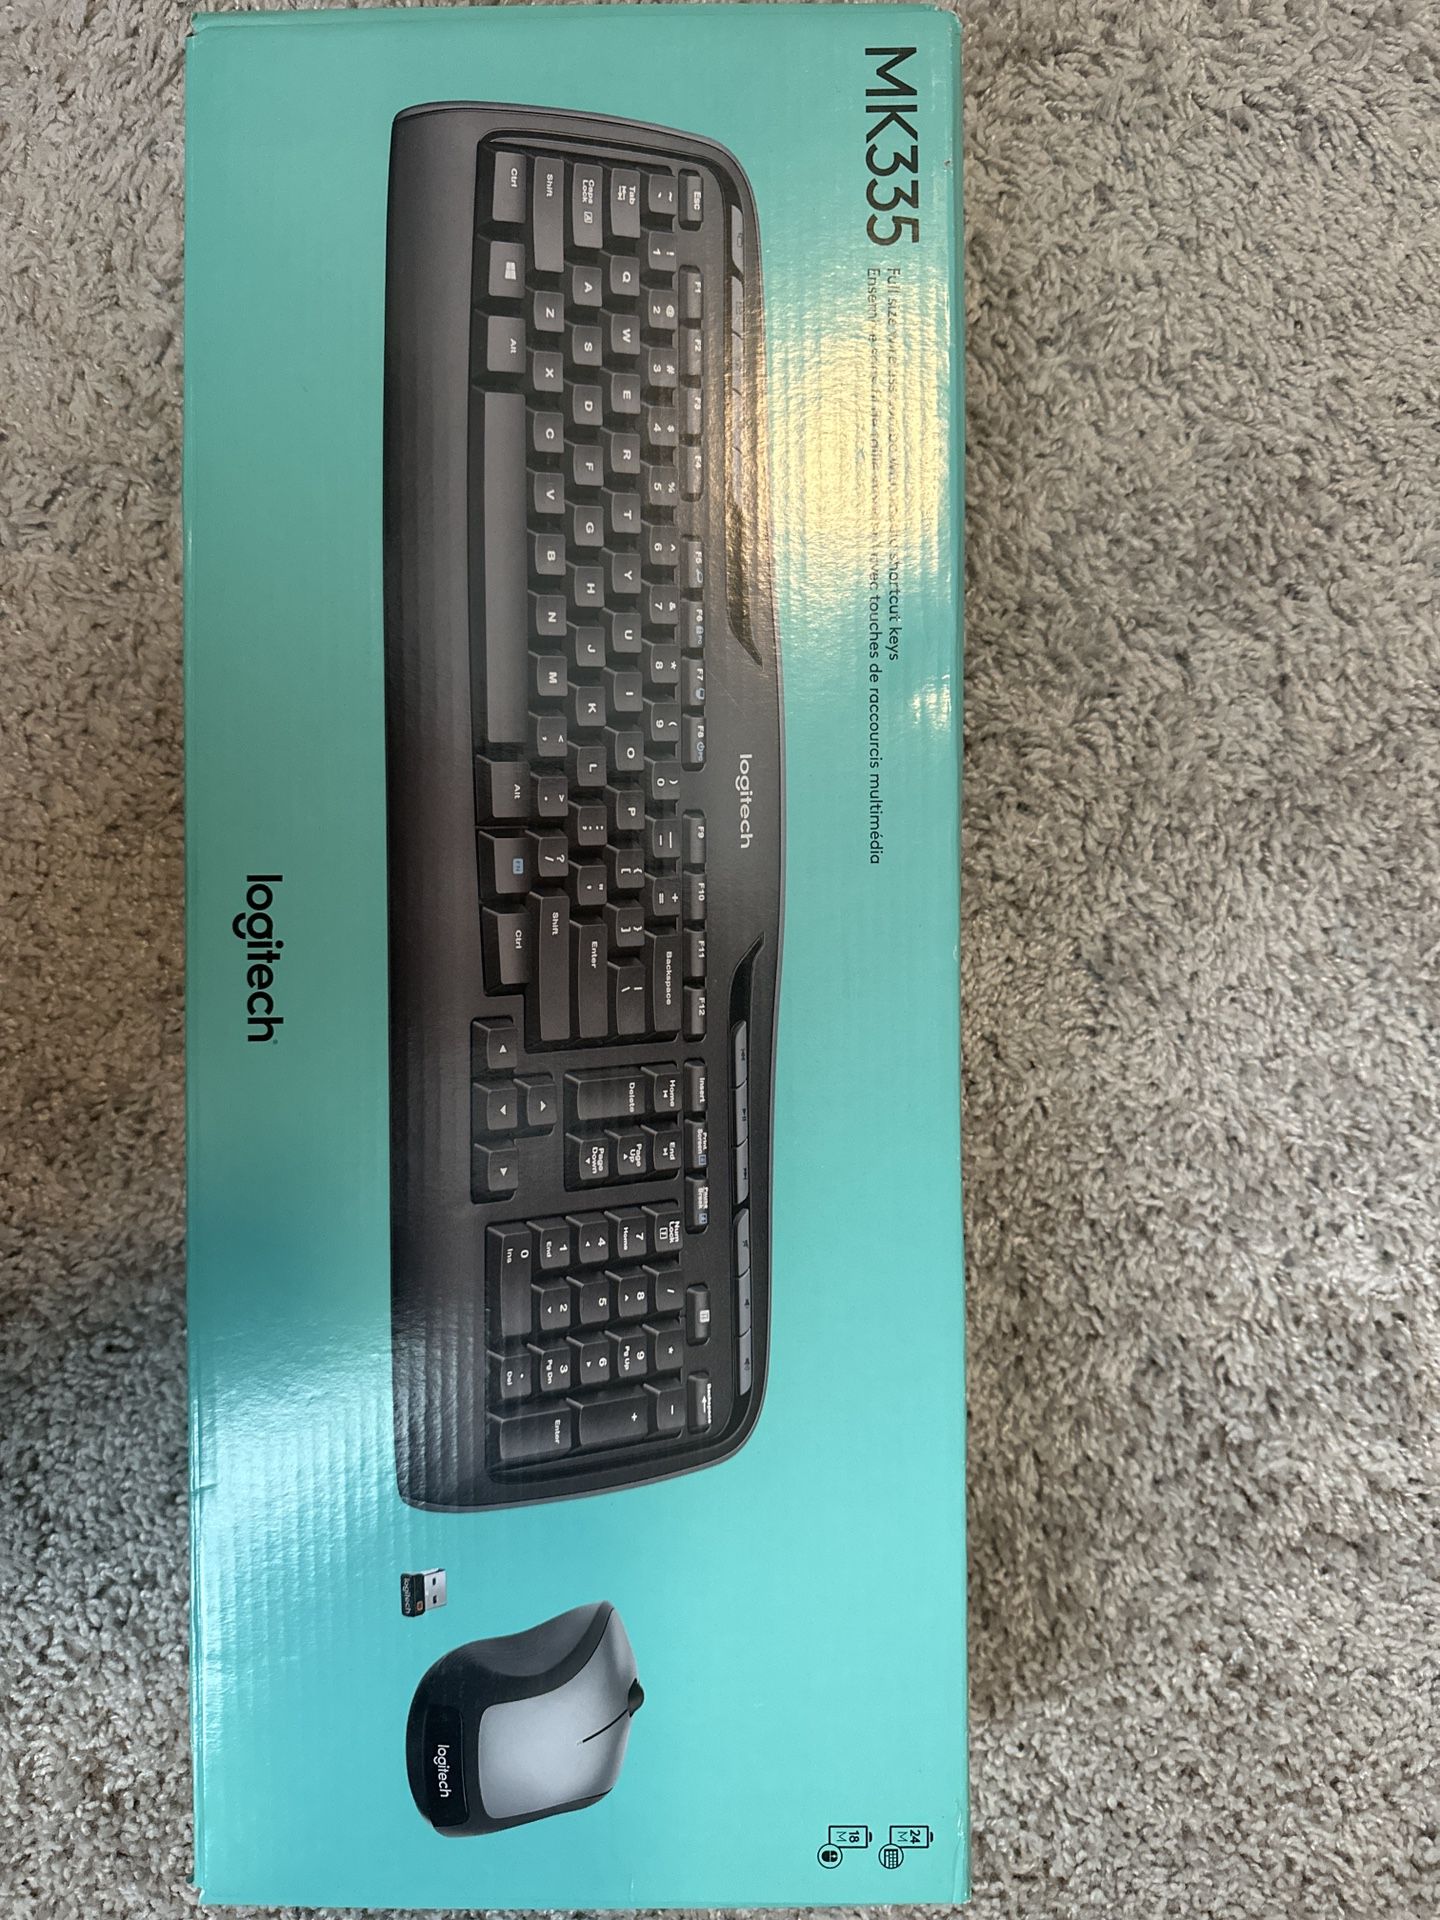 Brand New MK335 Wireless Keyboard And Mouse Combo.